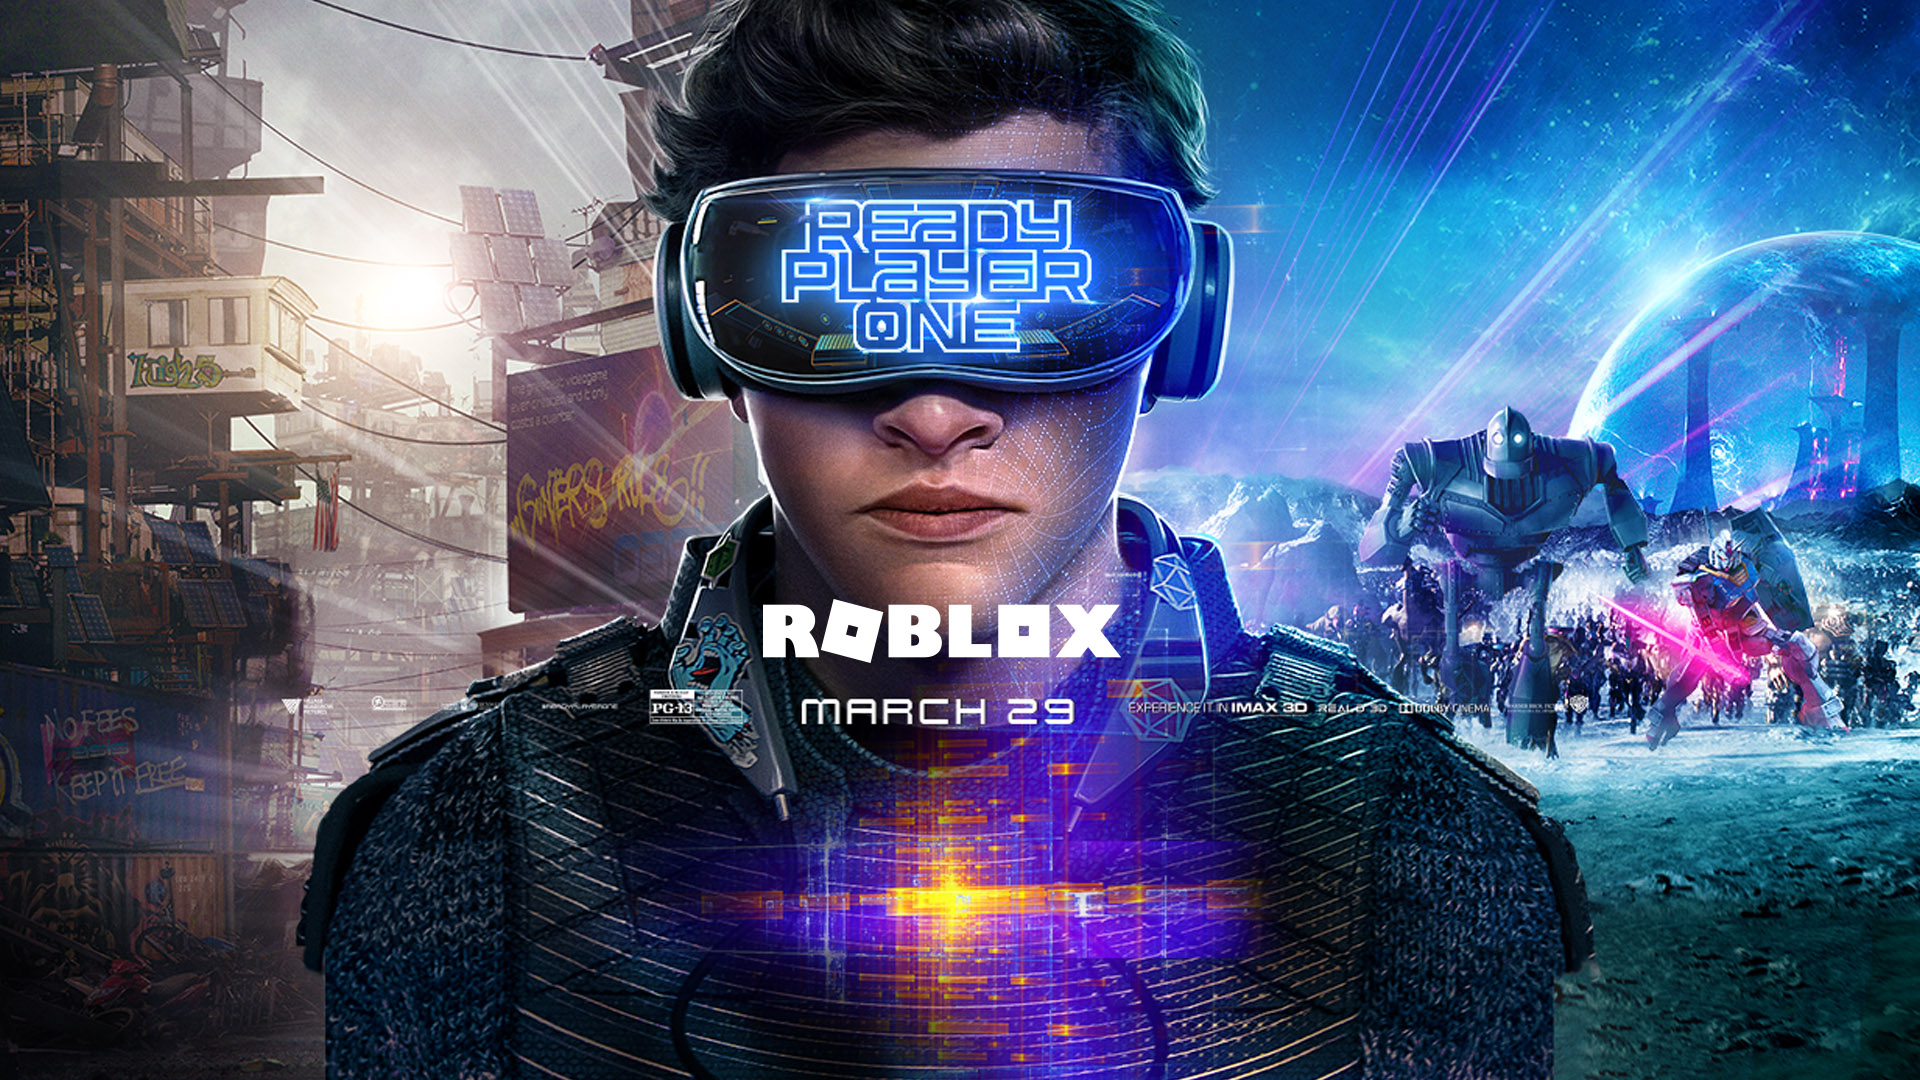 And The Winner Of The Roblox Ready Player One Adventure Is